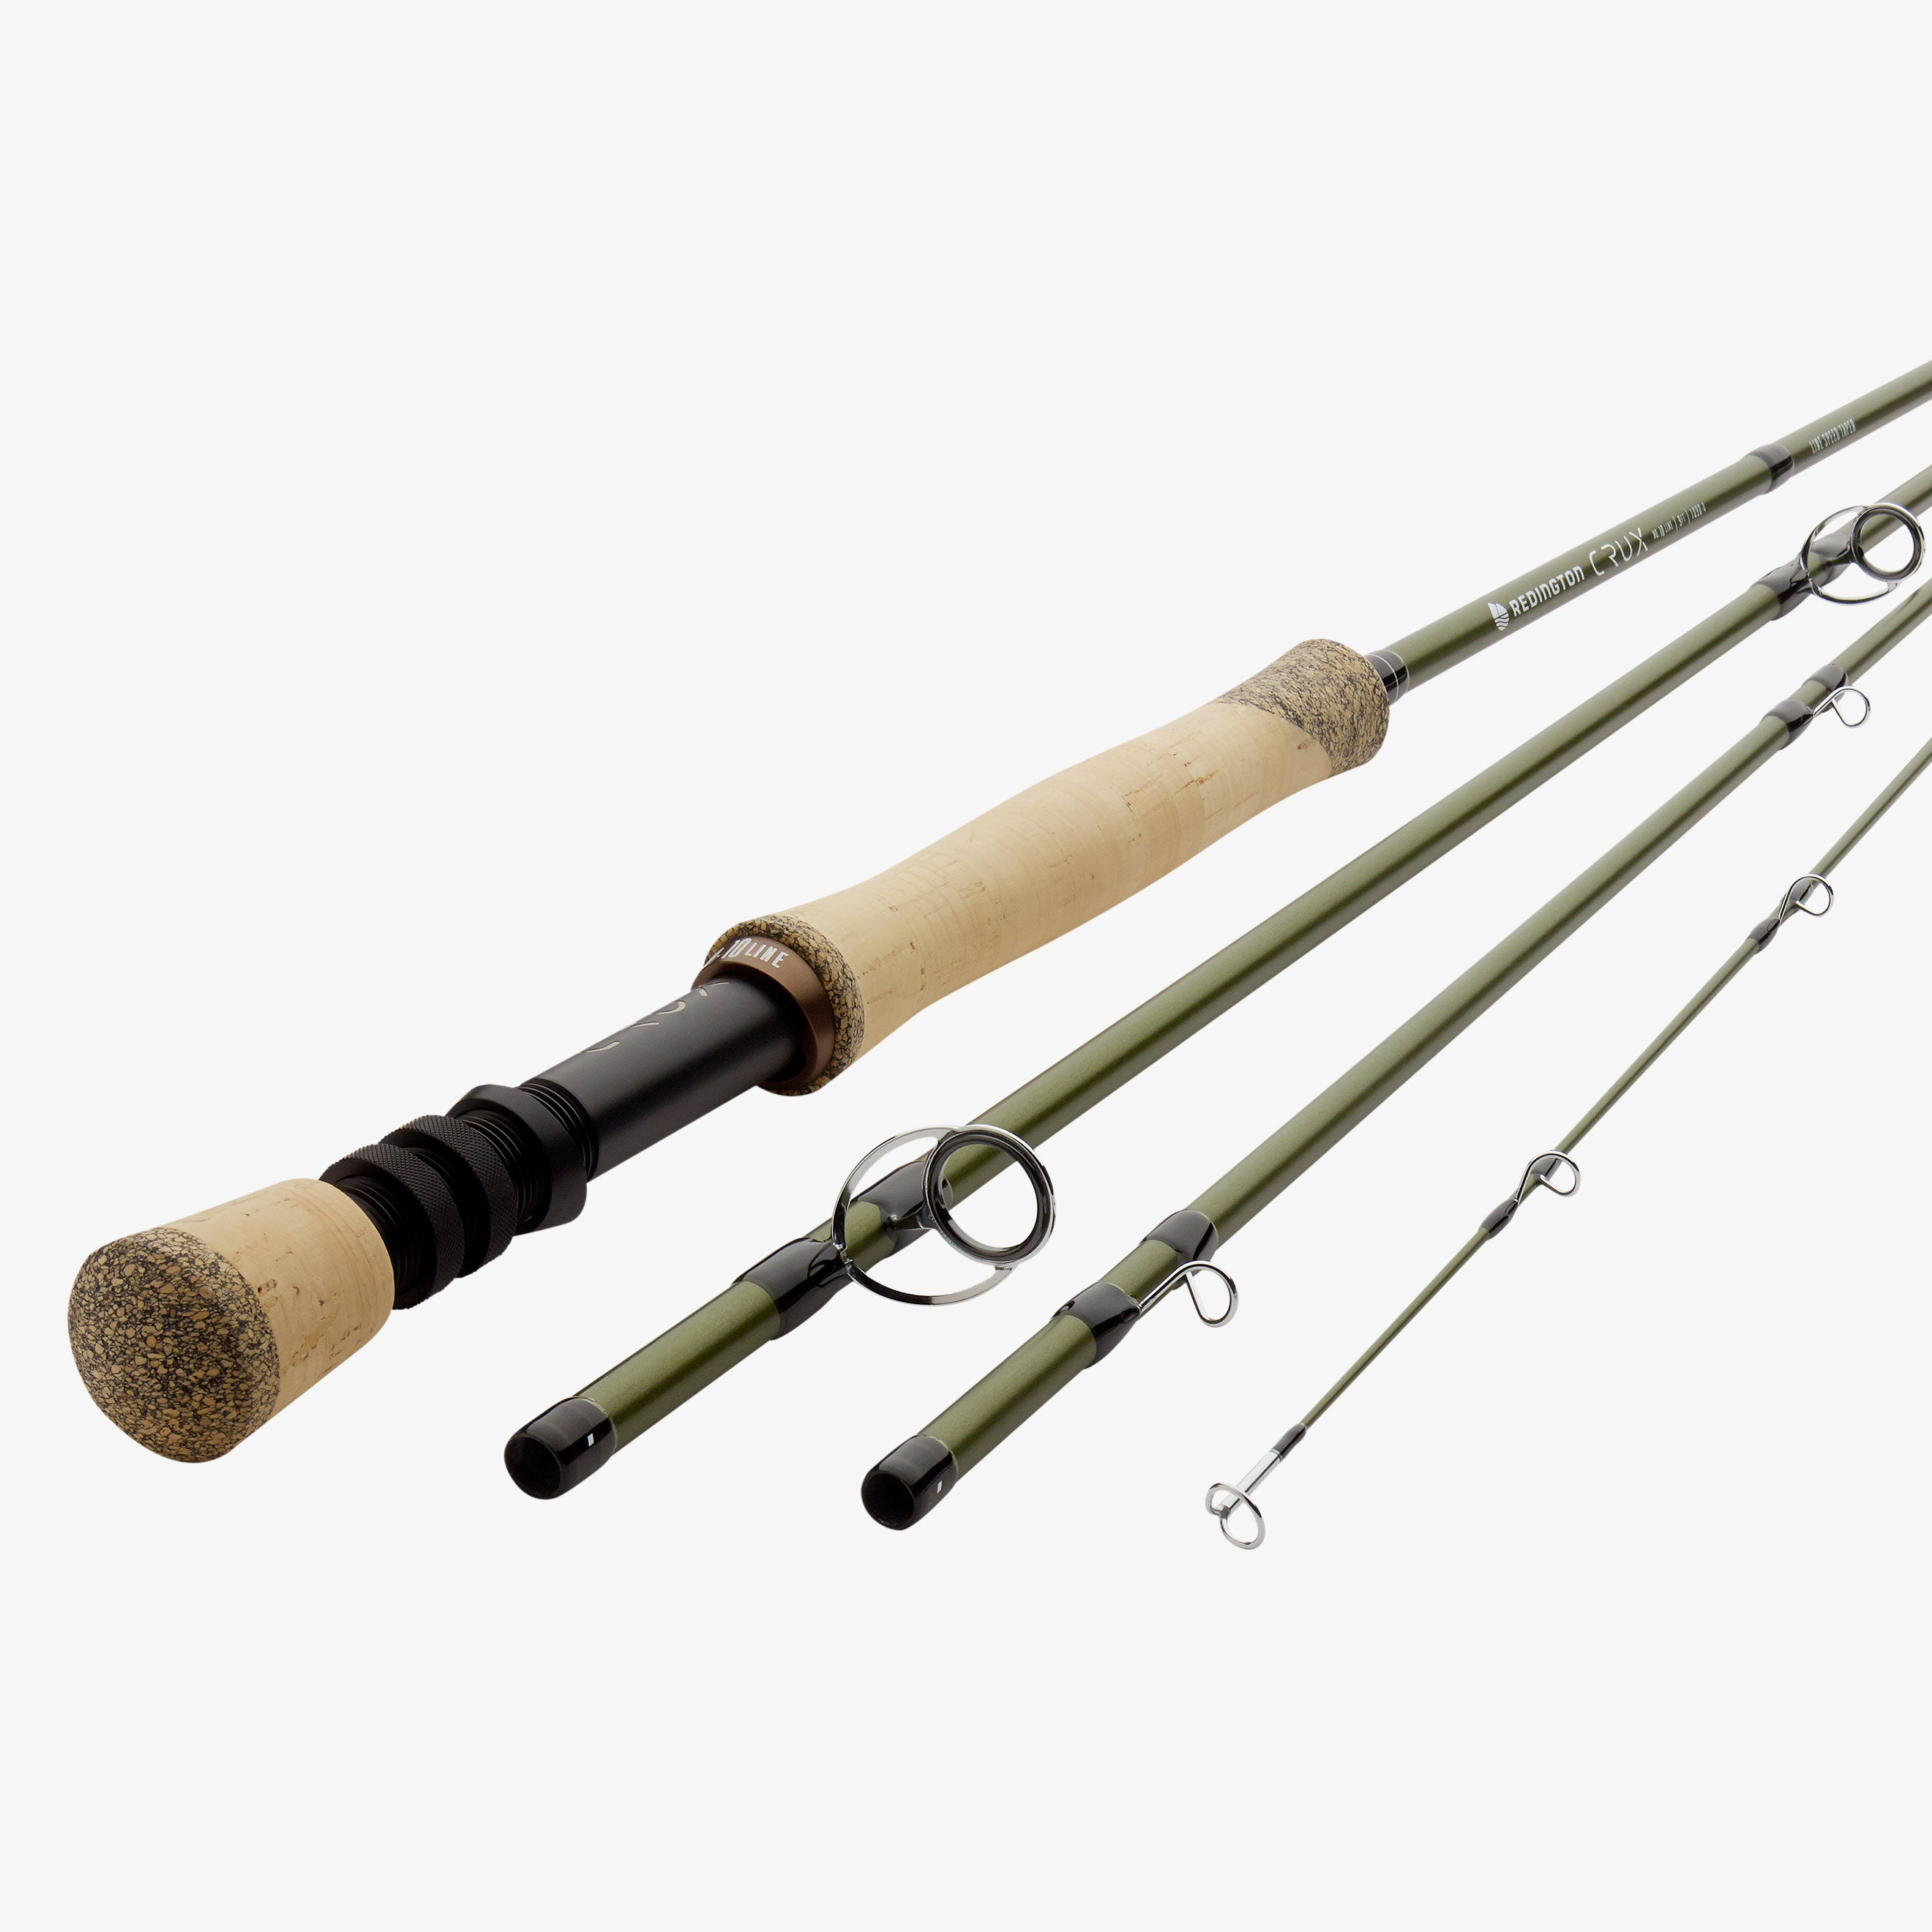 Hard Chrome fly rod guide set for 9ft 4wt to 6wt rod - Qingdao